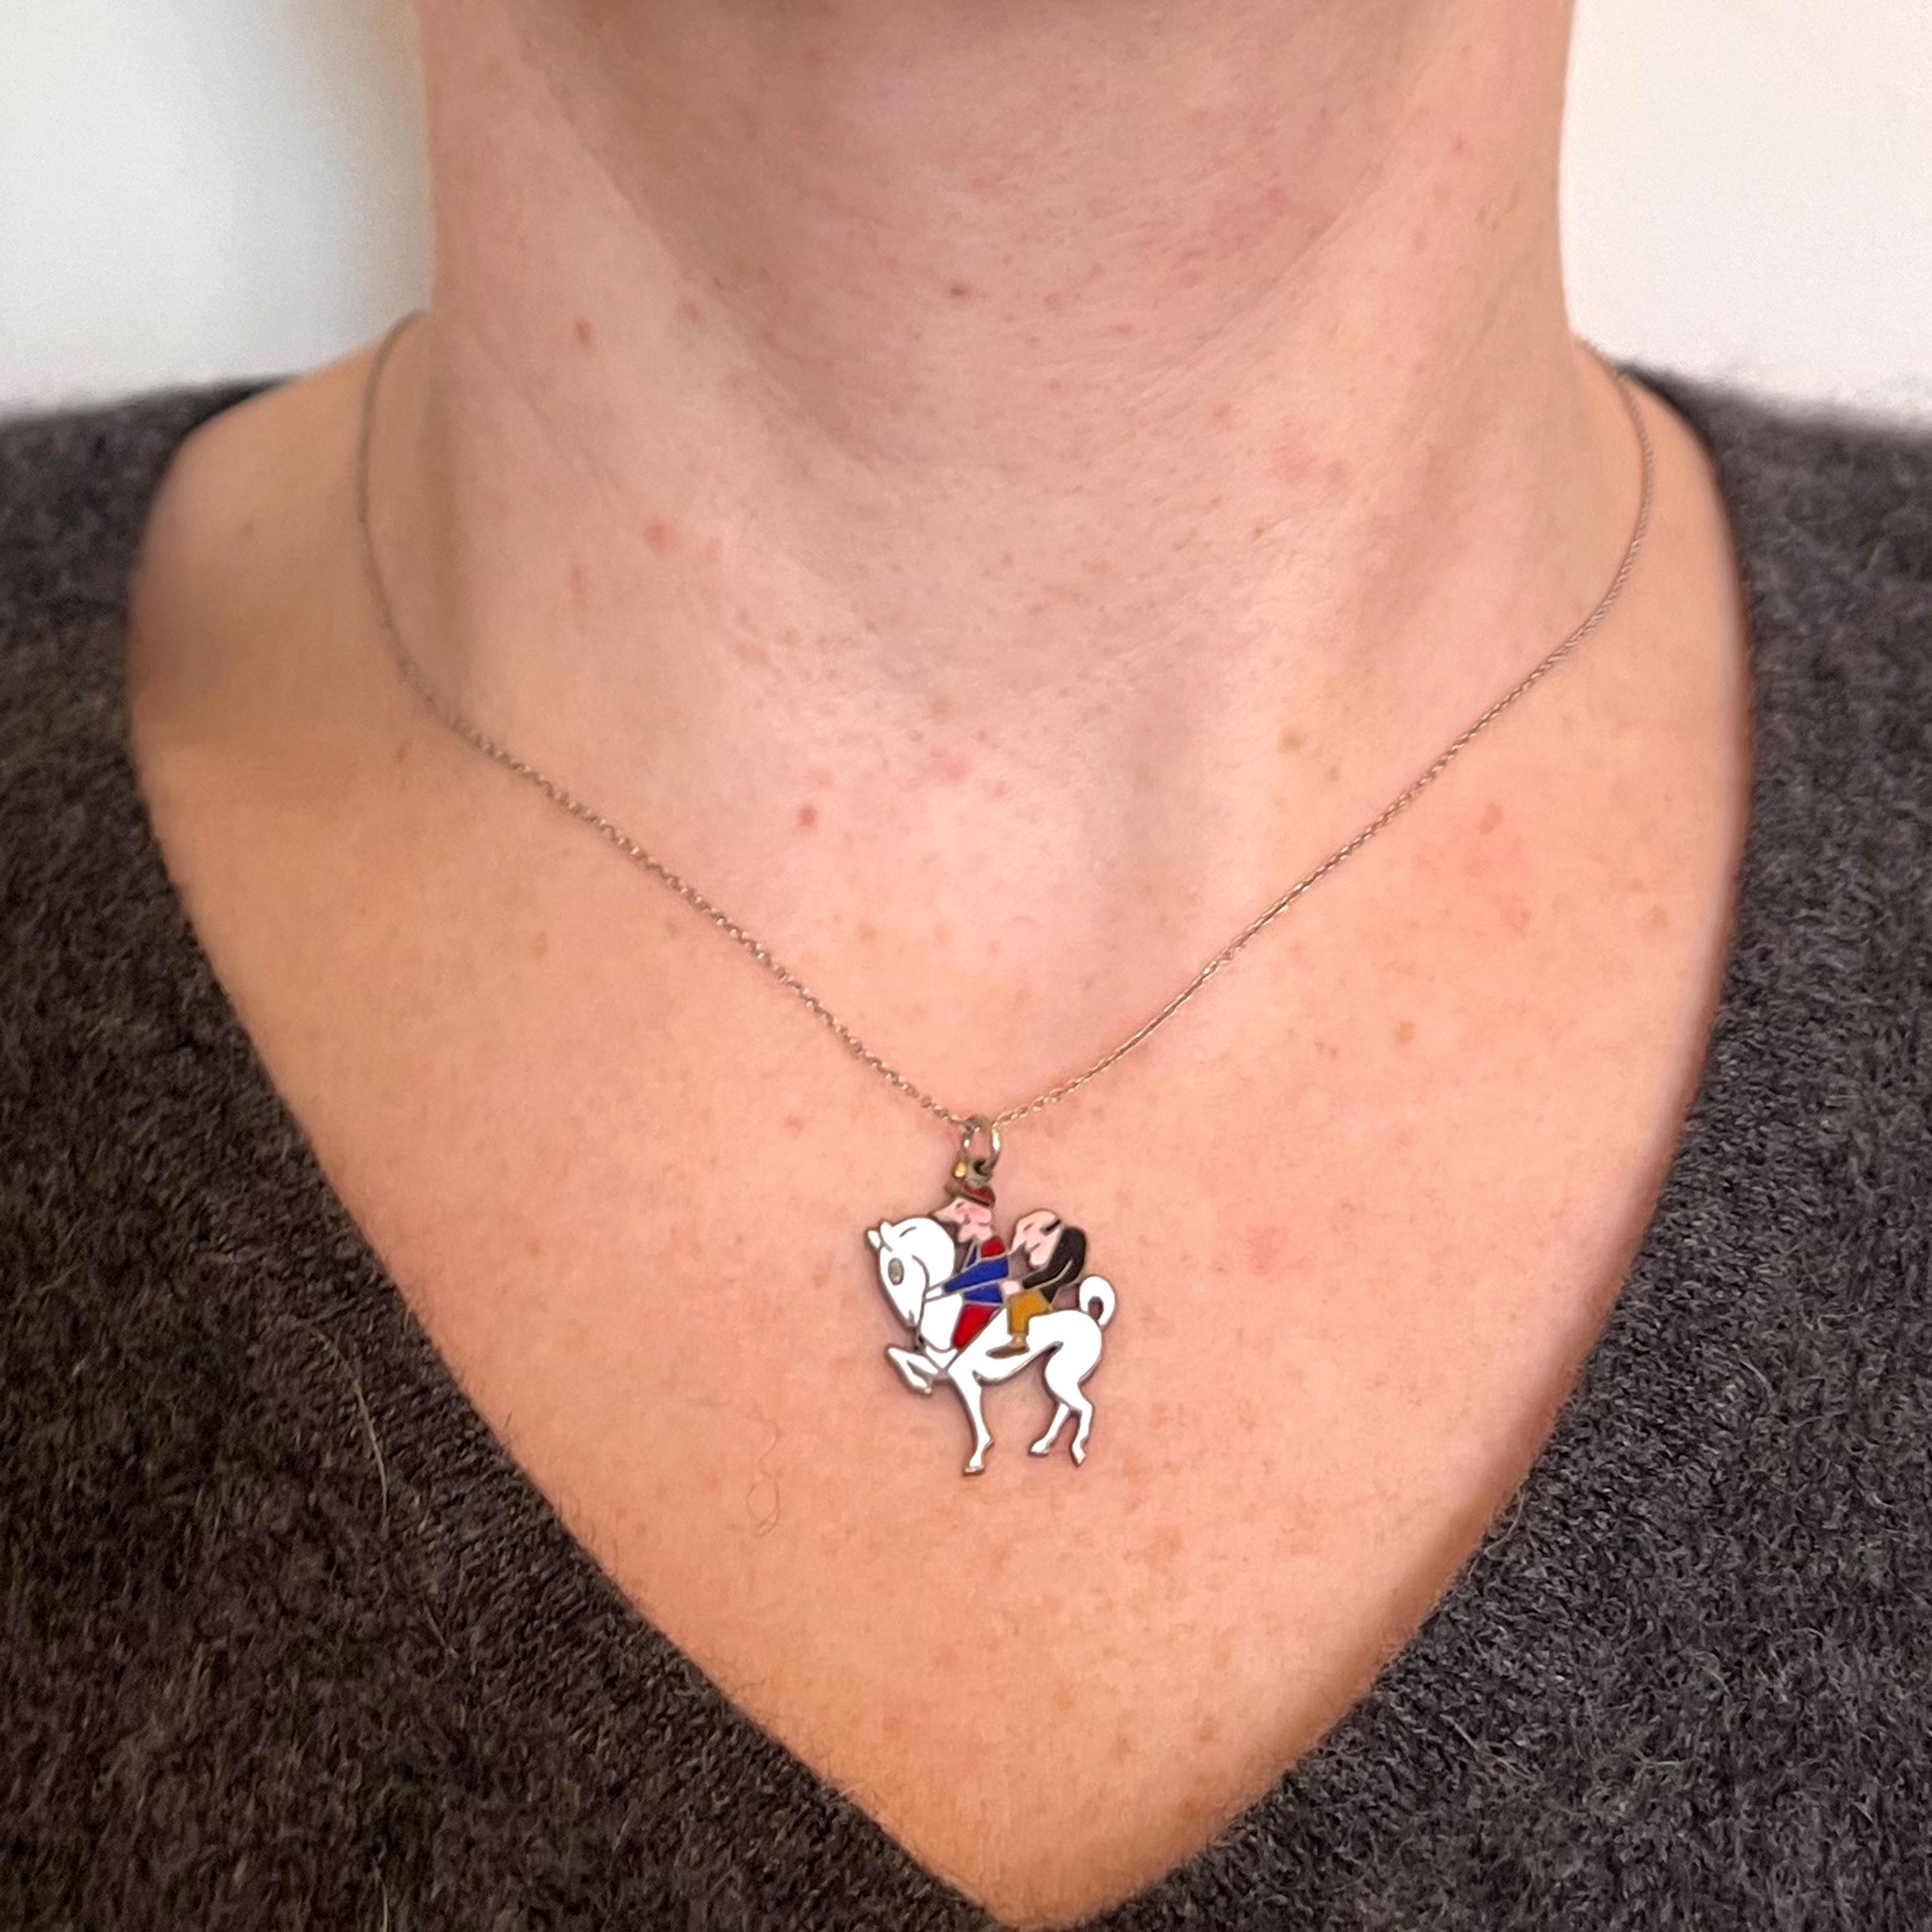 A classic Art Deco charm pendant by Van Cleef et Arpels in styptor with multi-coloured enamel depicting 